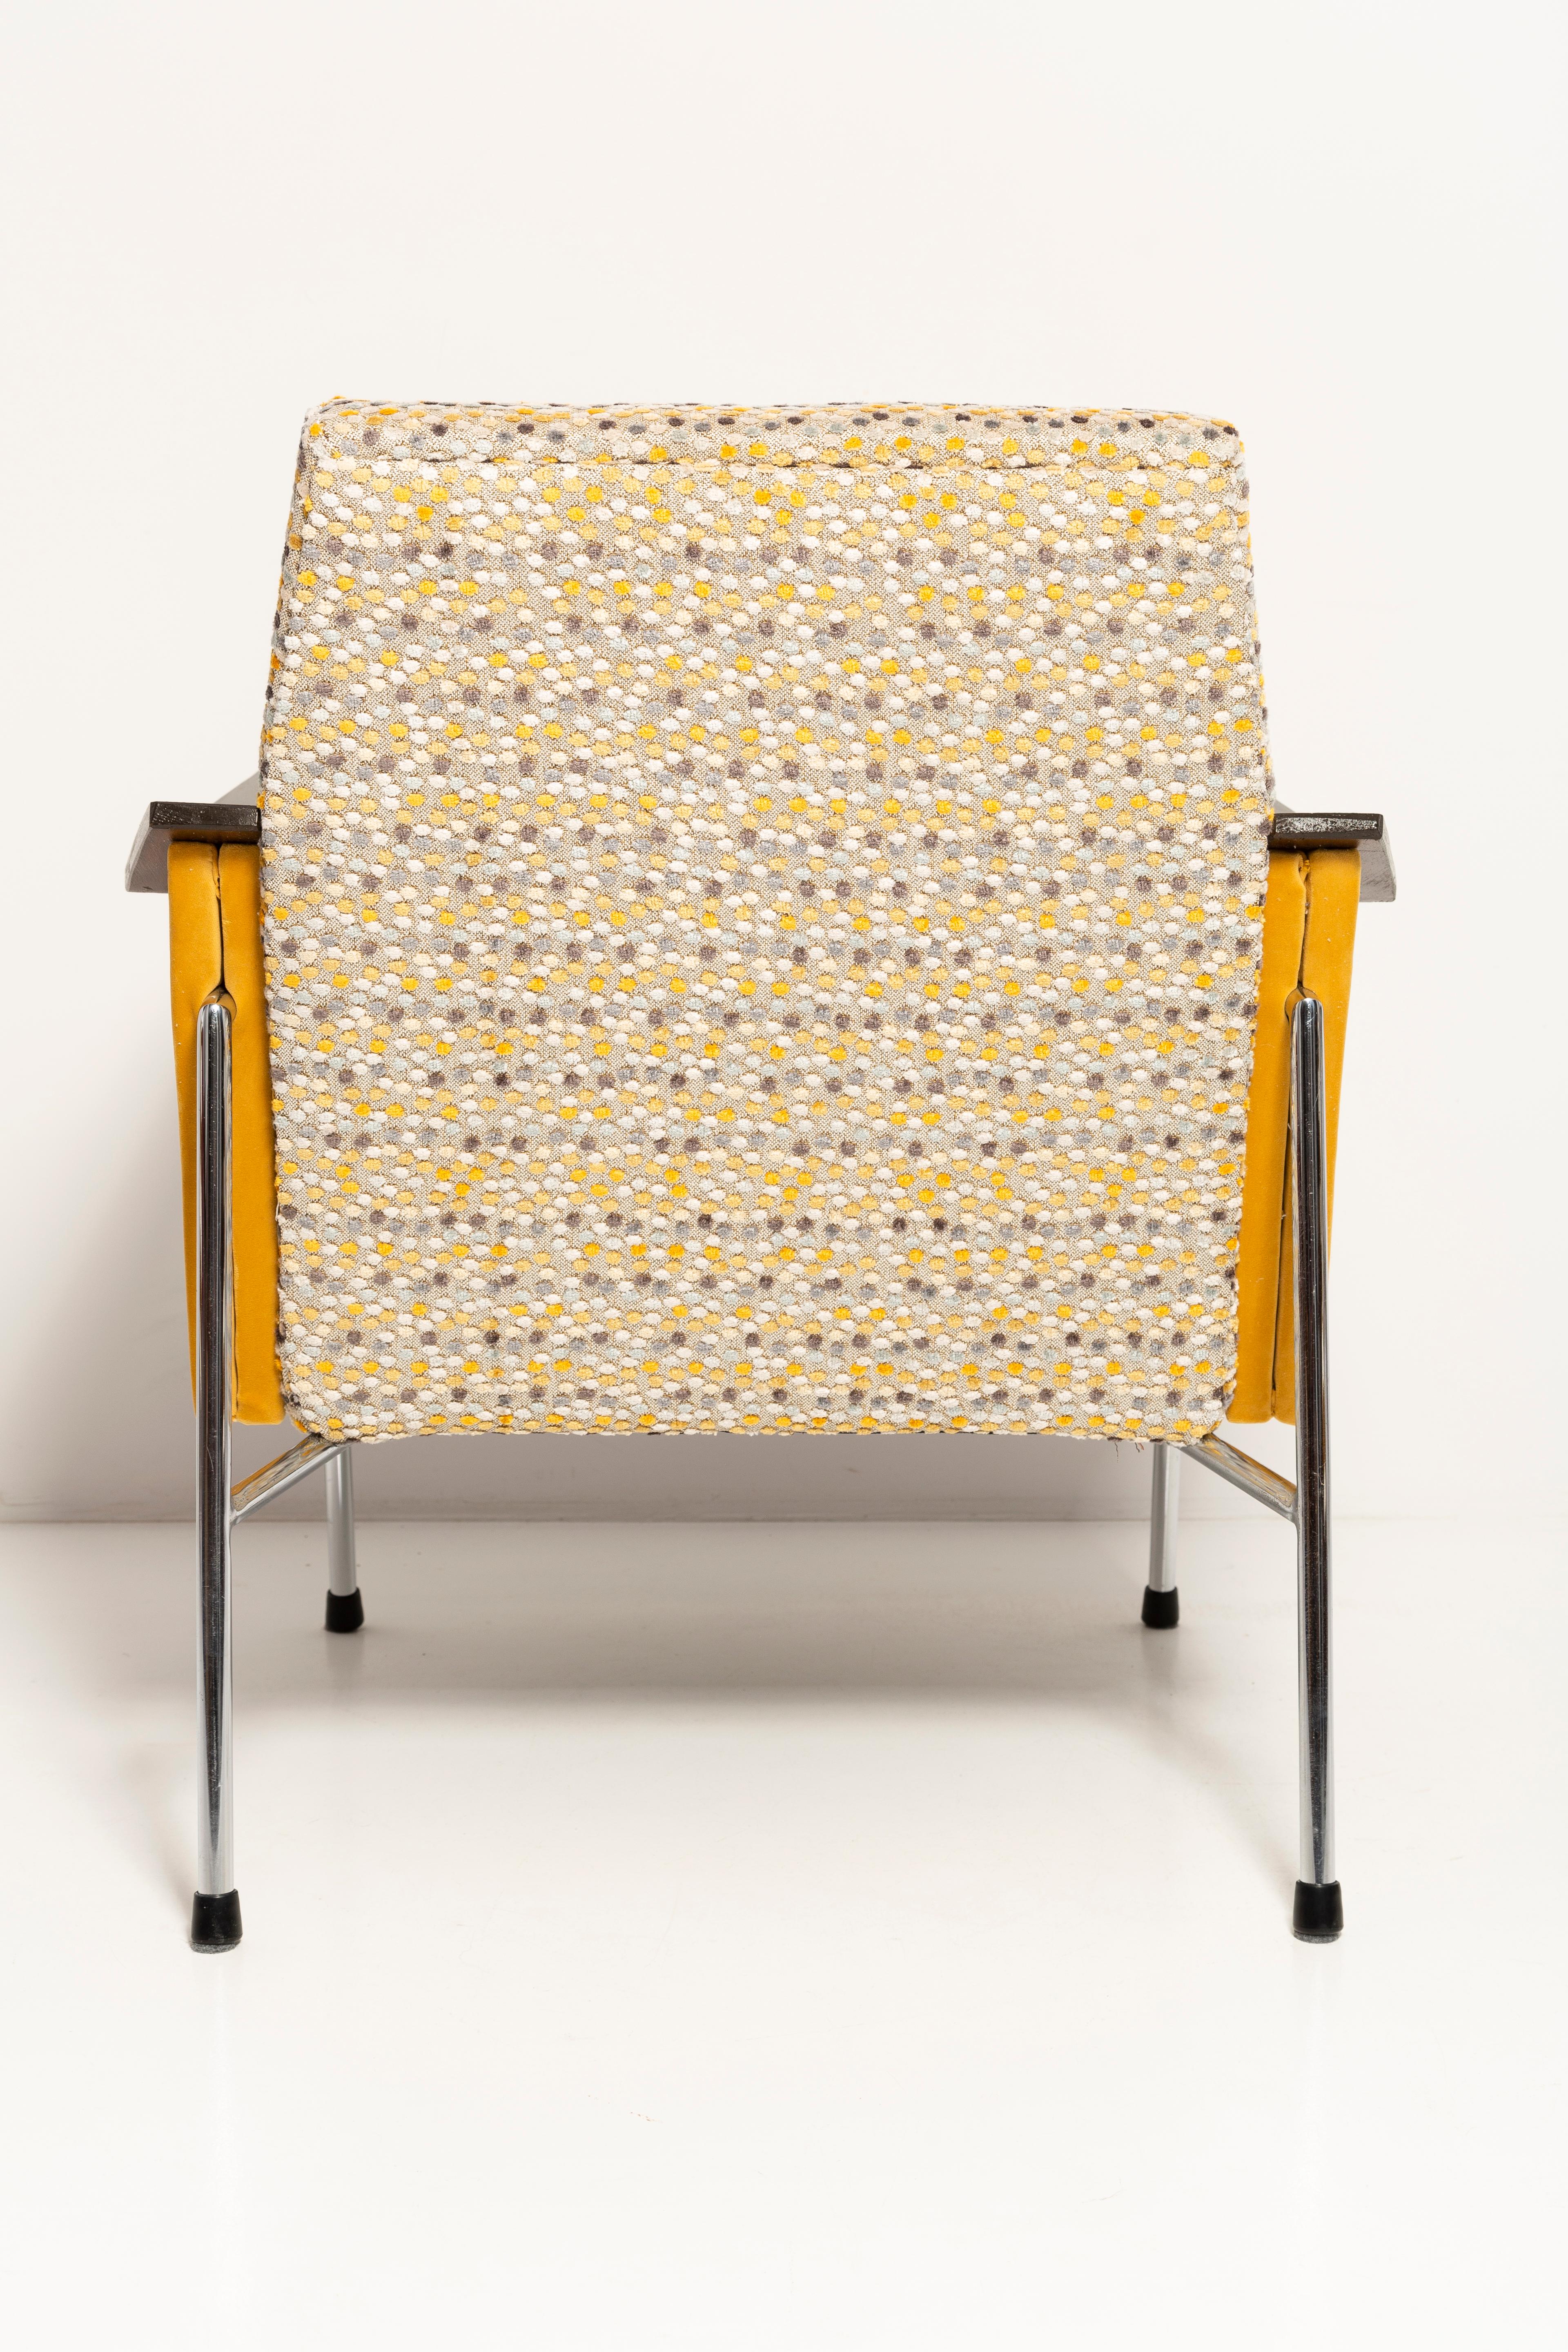 Pair of Mid Century Bat Armchairs, Yellow Dots, Bauhaus Style, Poland, 1970s. For Sale 6